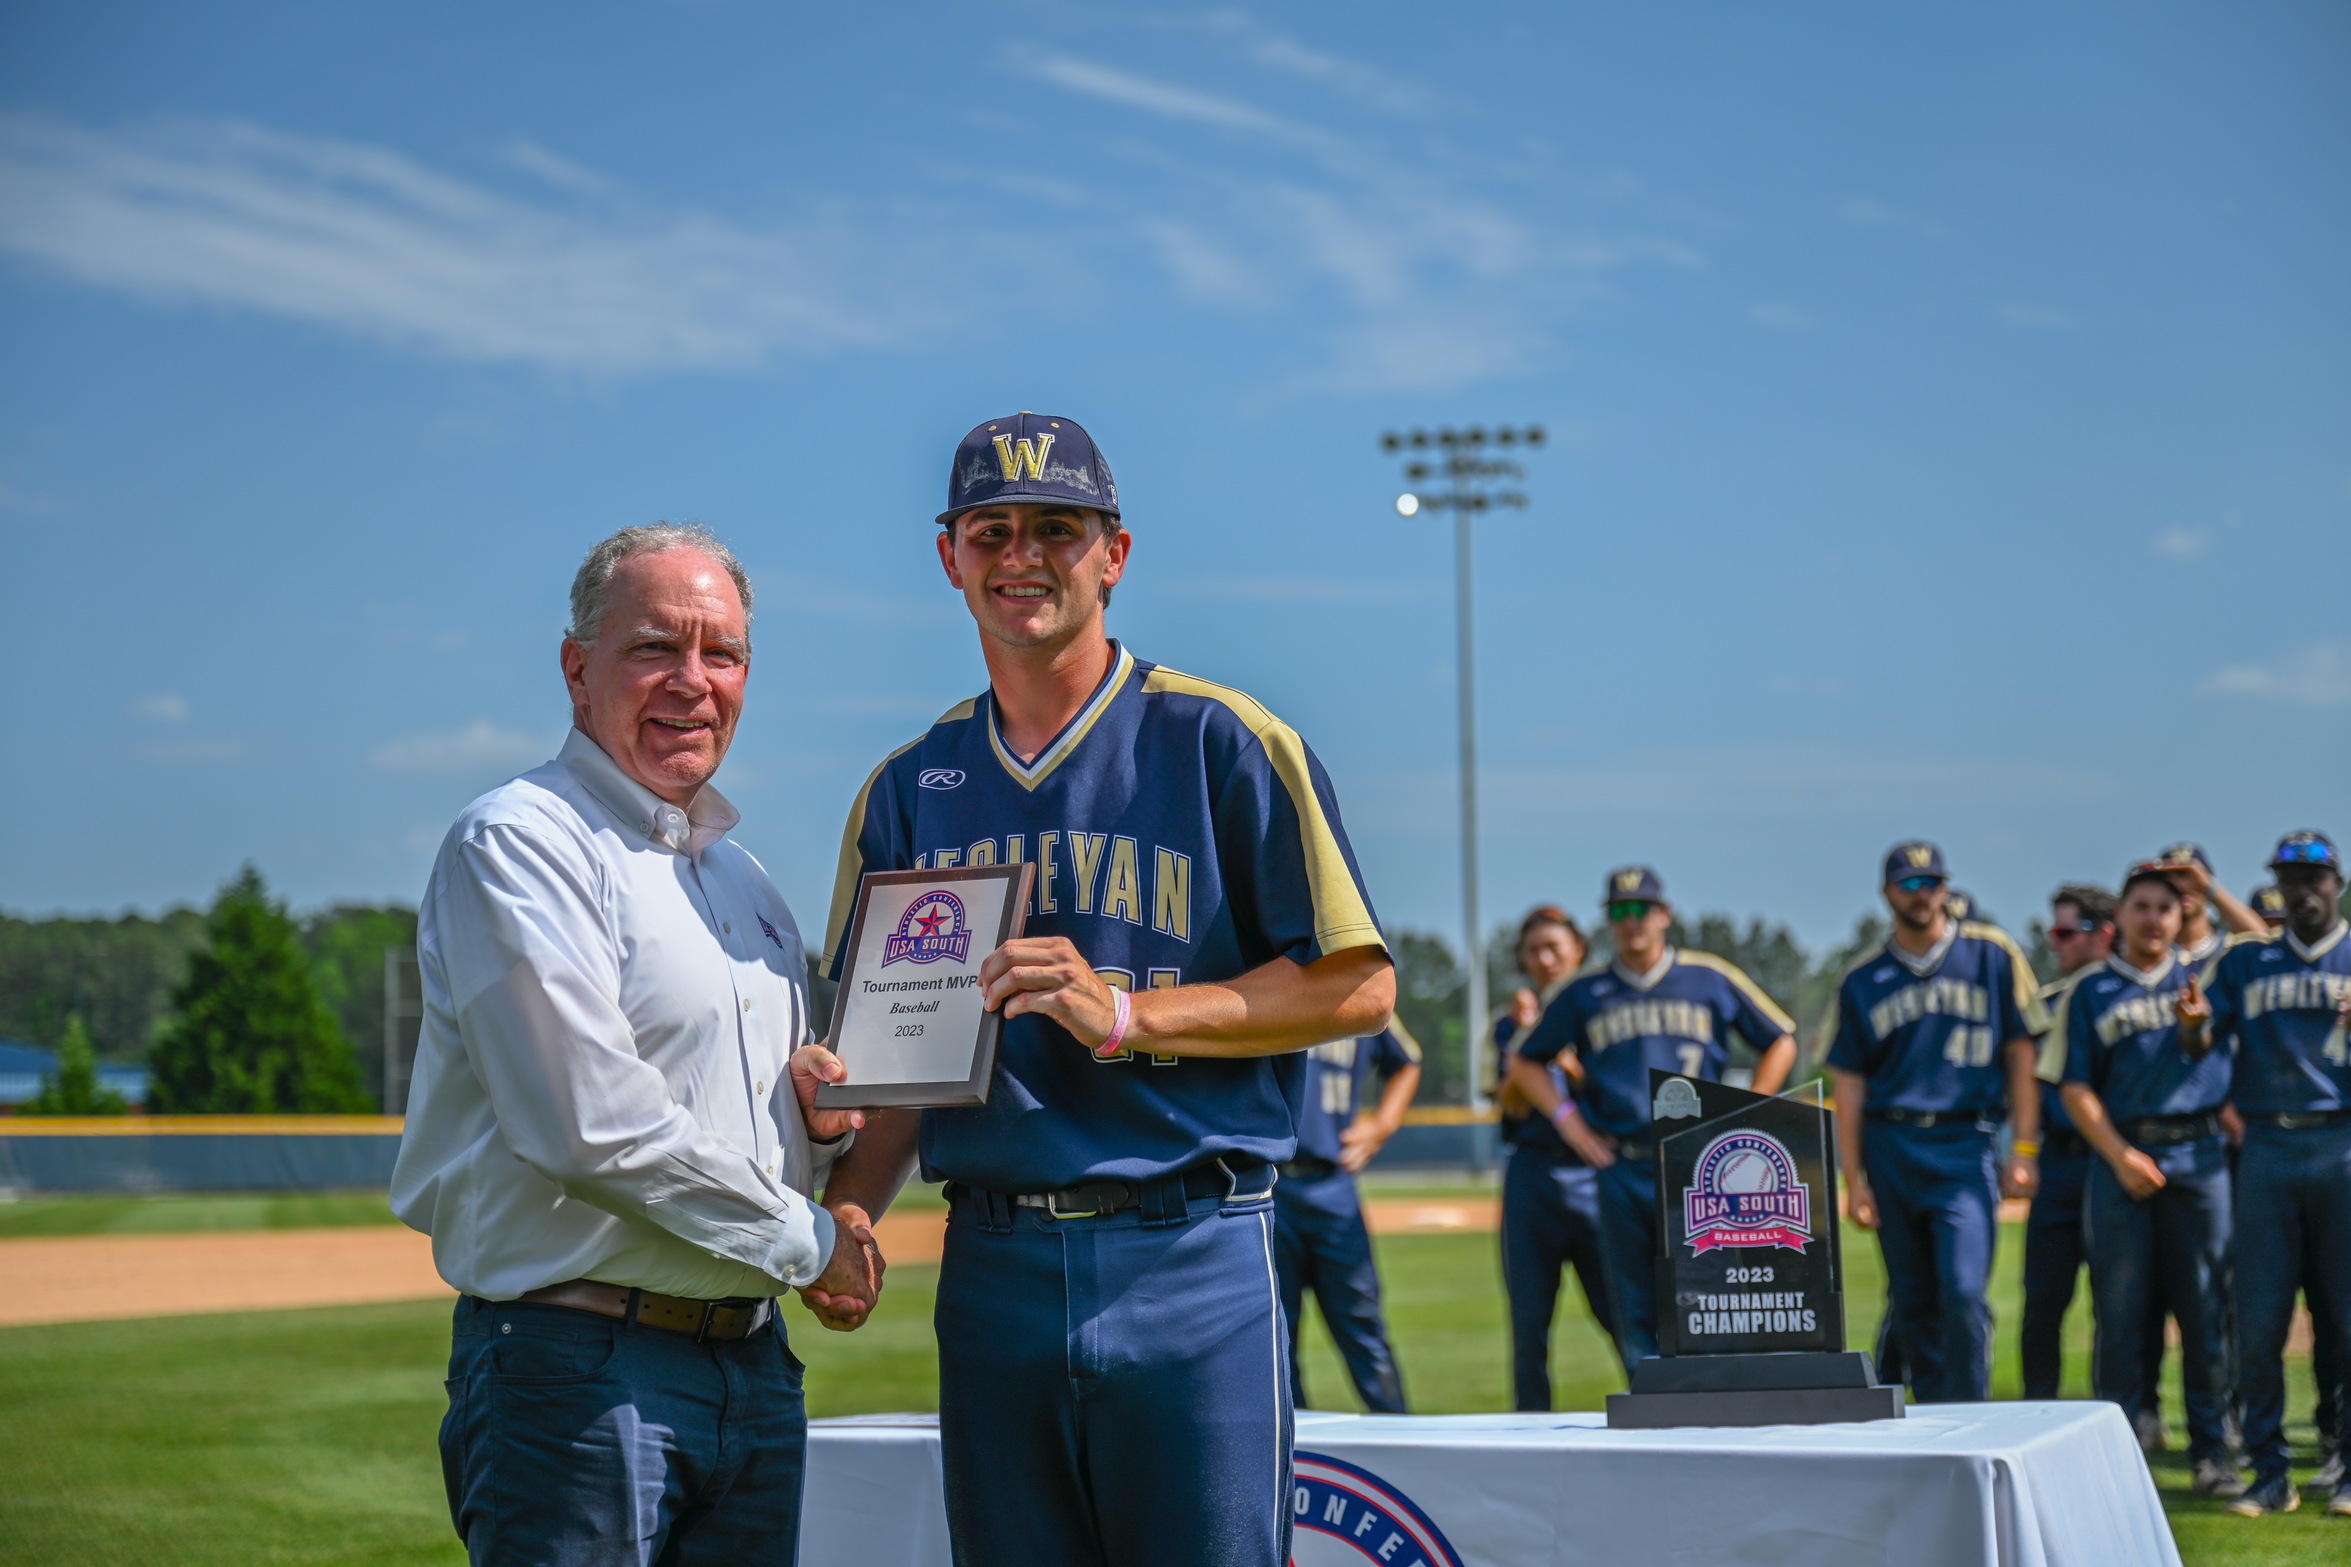 A Story of Redemption, Payne Stolsworth Named First Team All-American by ABCA